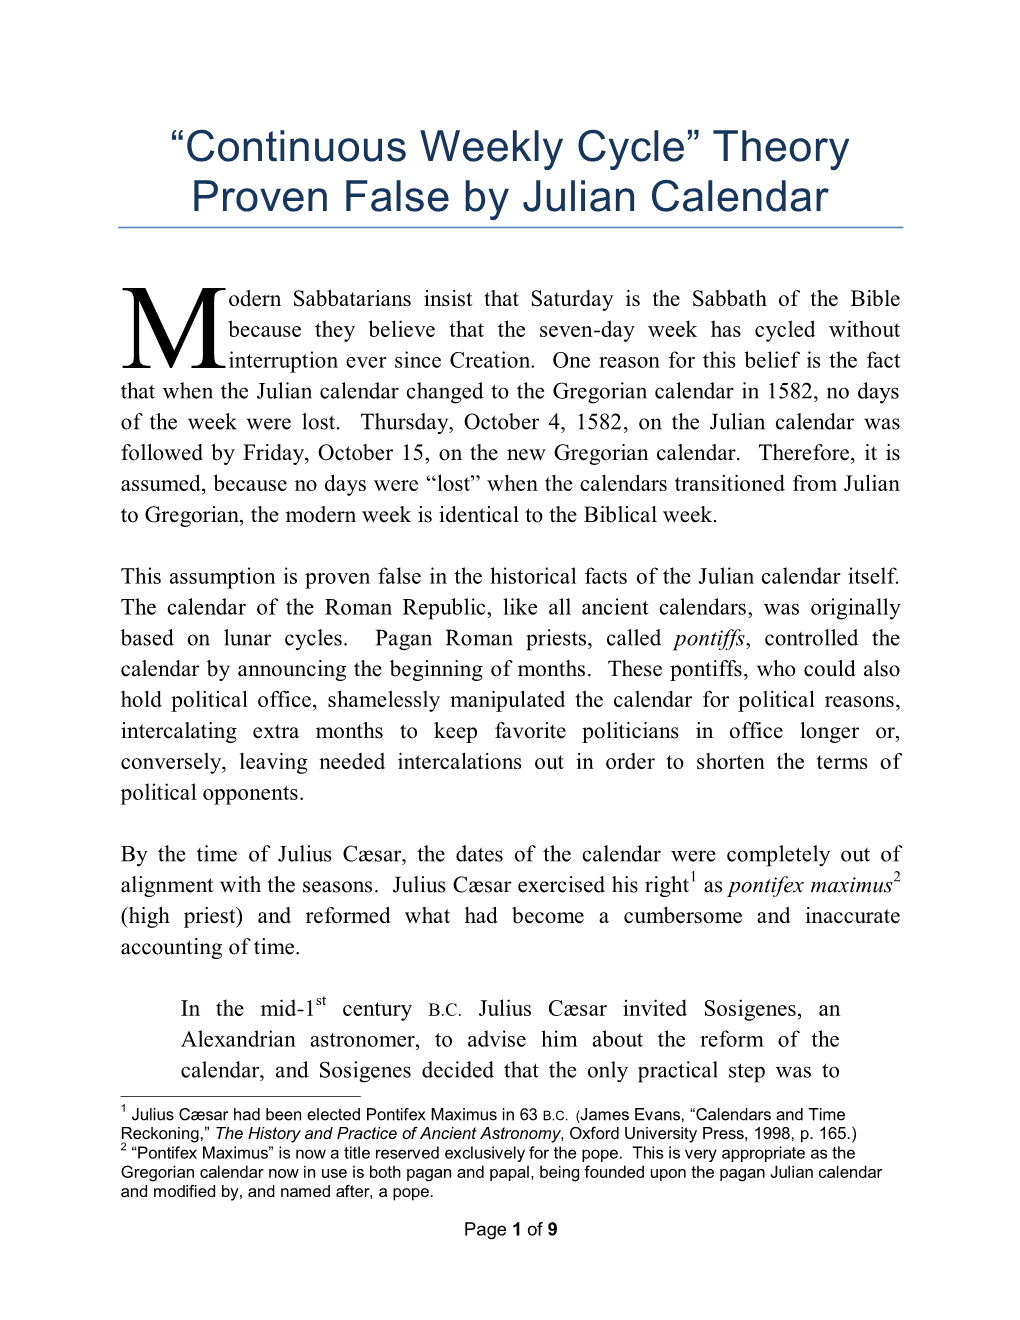 “Continuous Weekly Cycle” Theory Proven False by Julian Calendar